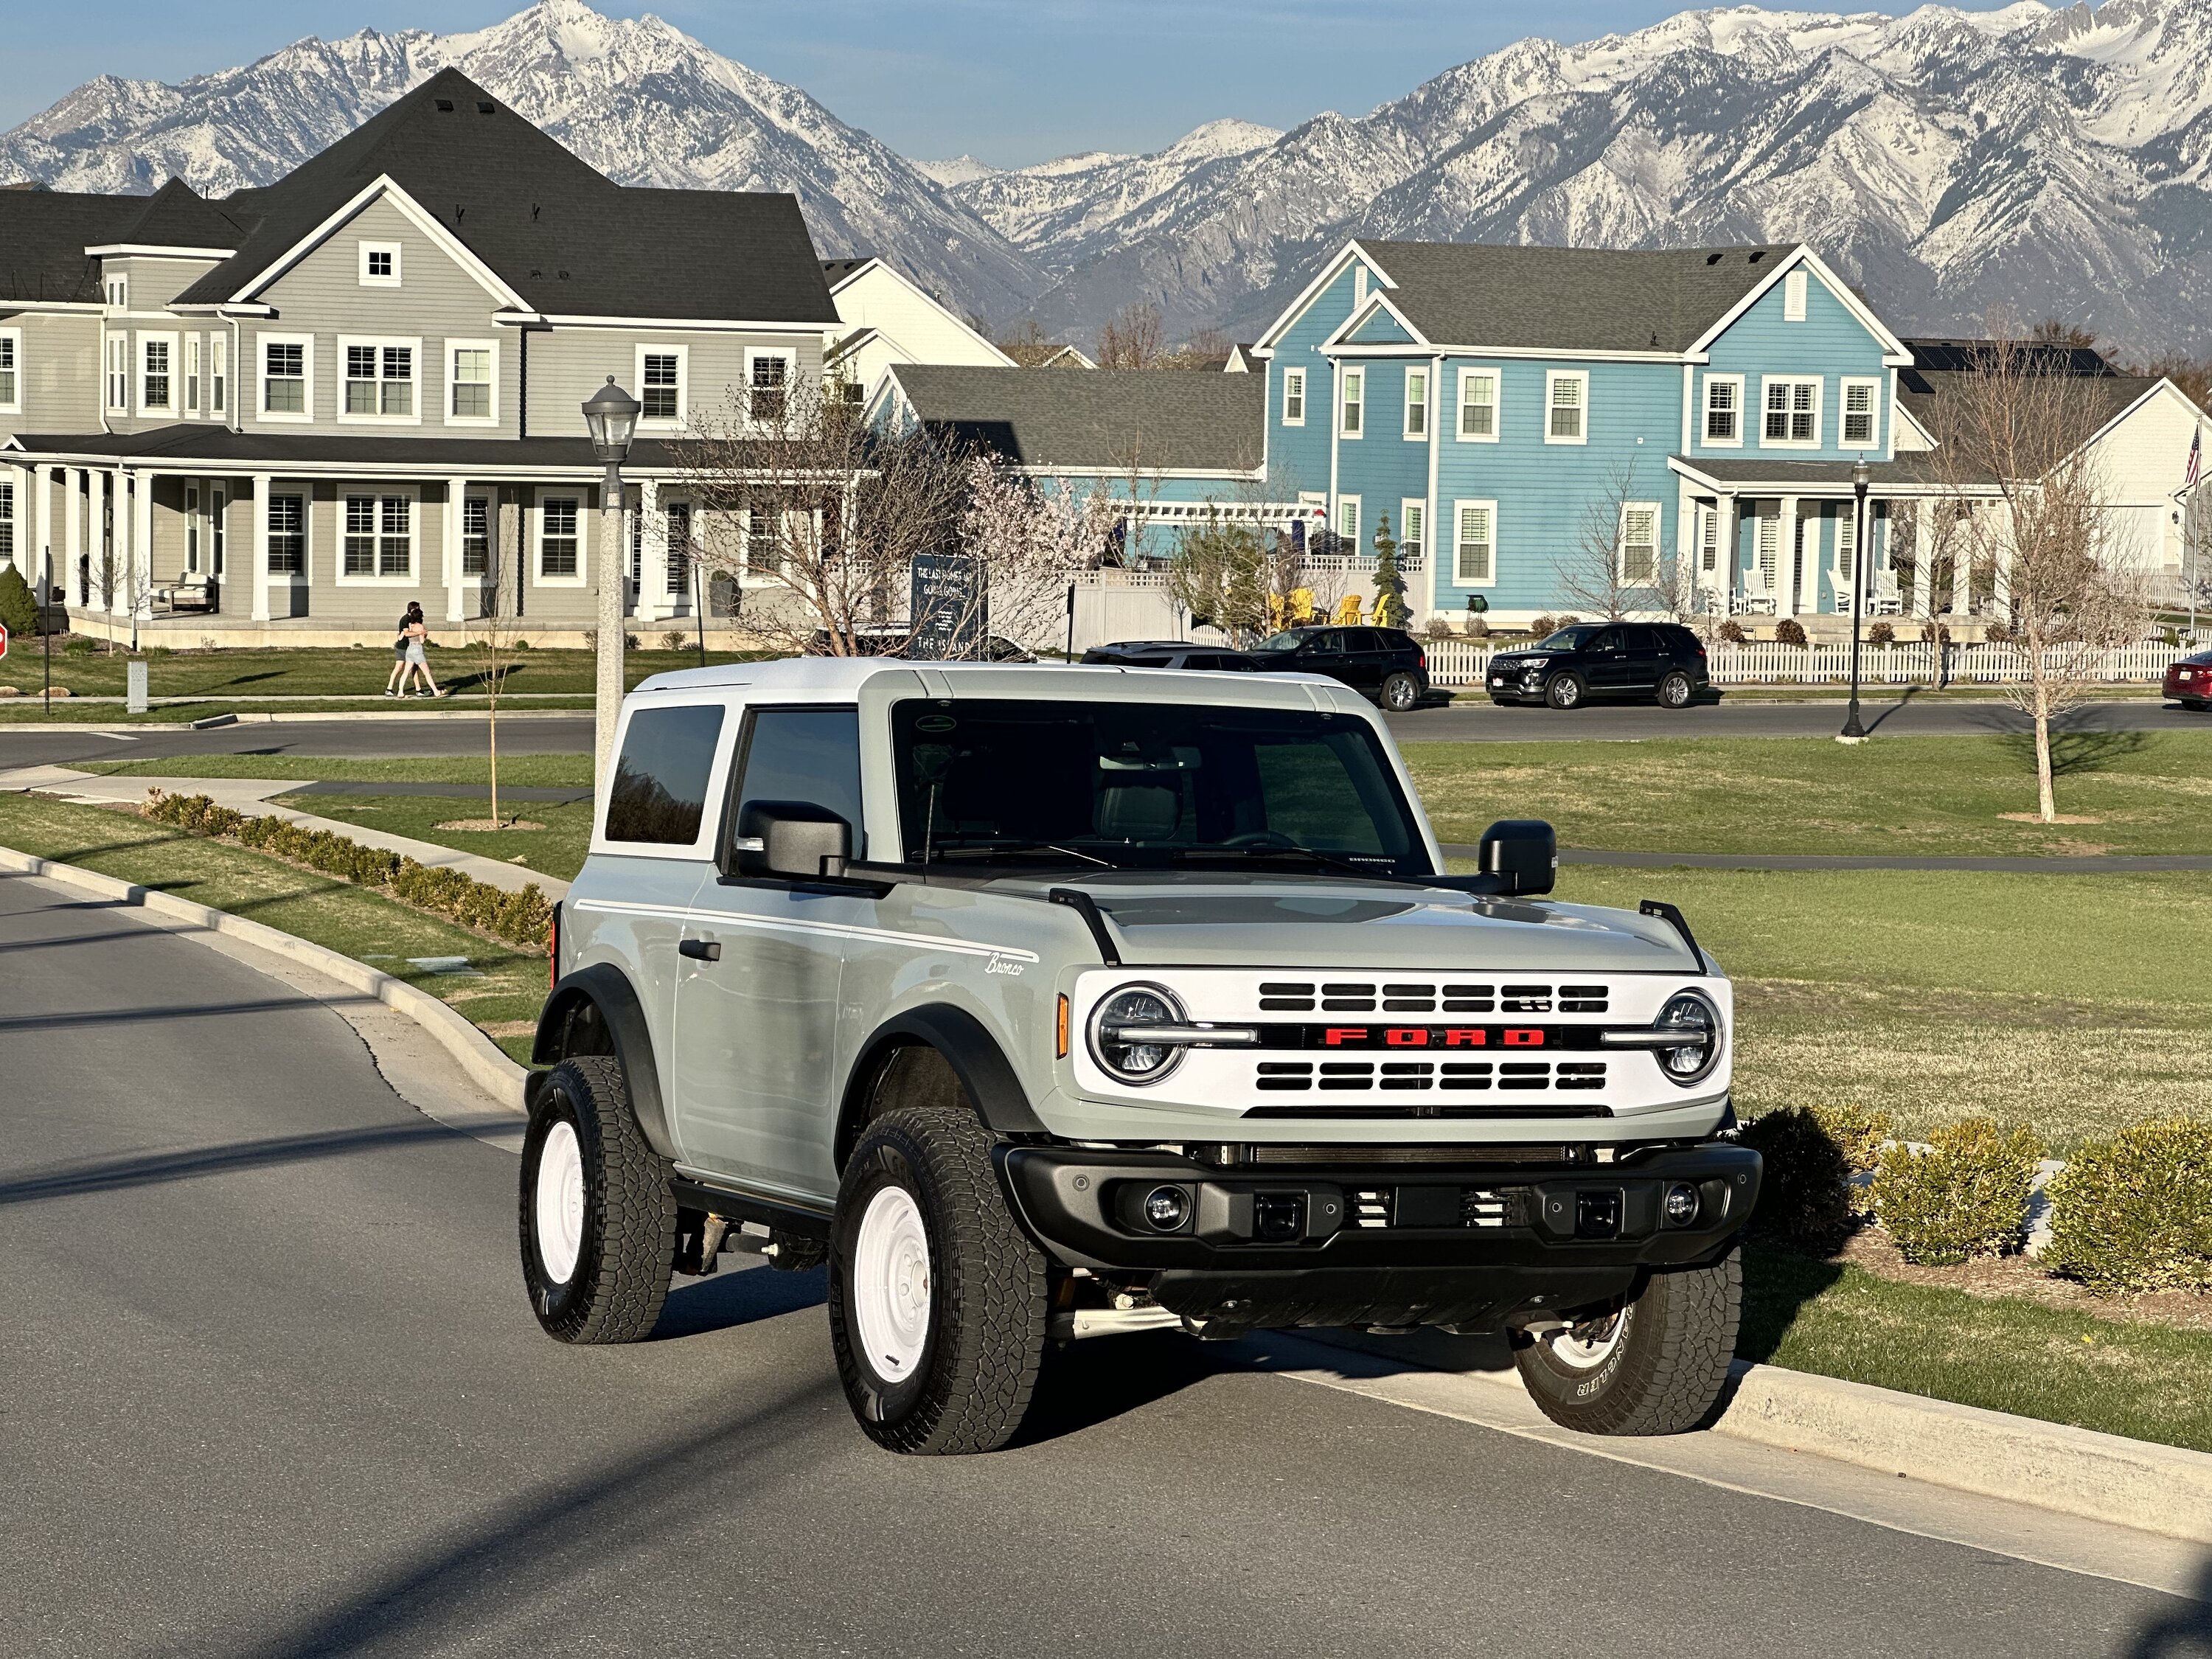 Ford Bronco Single best modification you've made on your Bronco!? tempImagehDes86